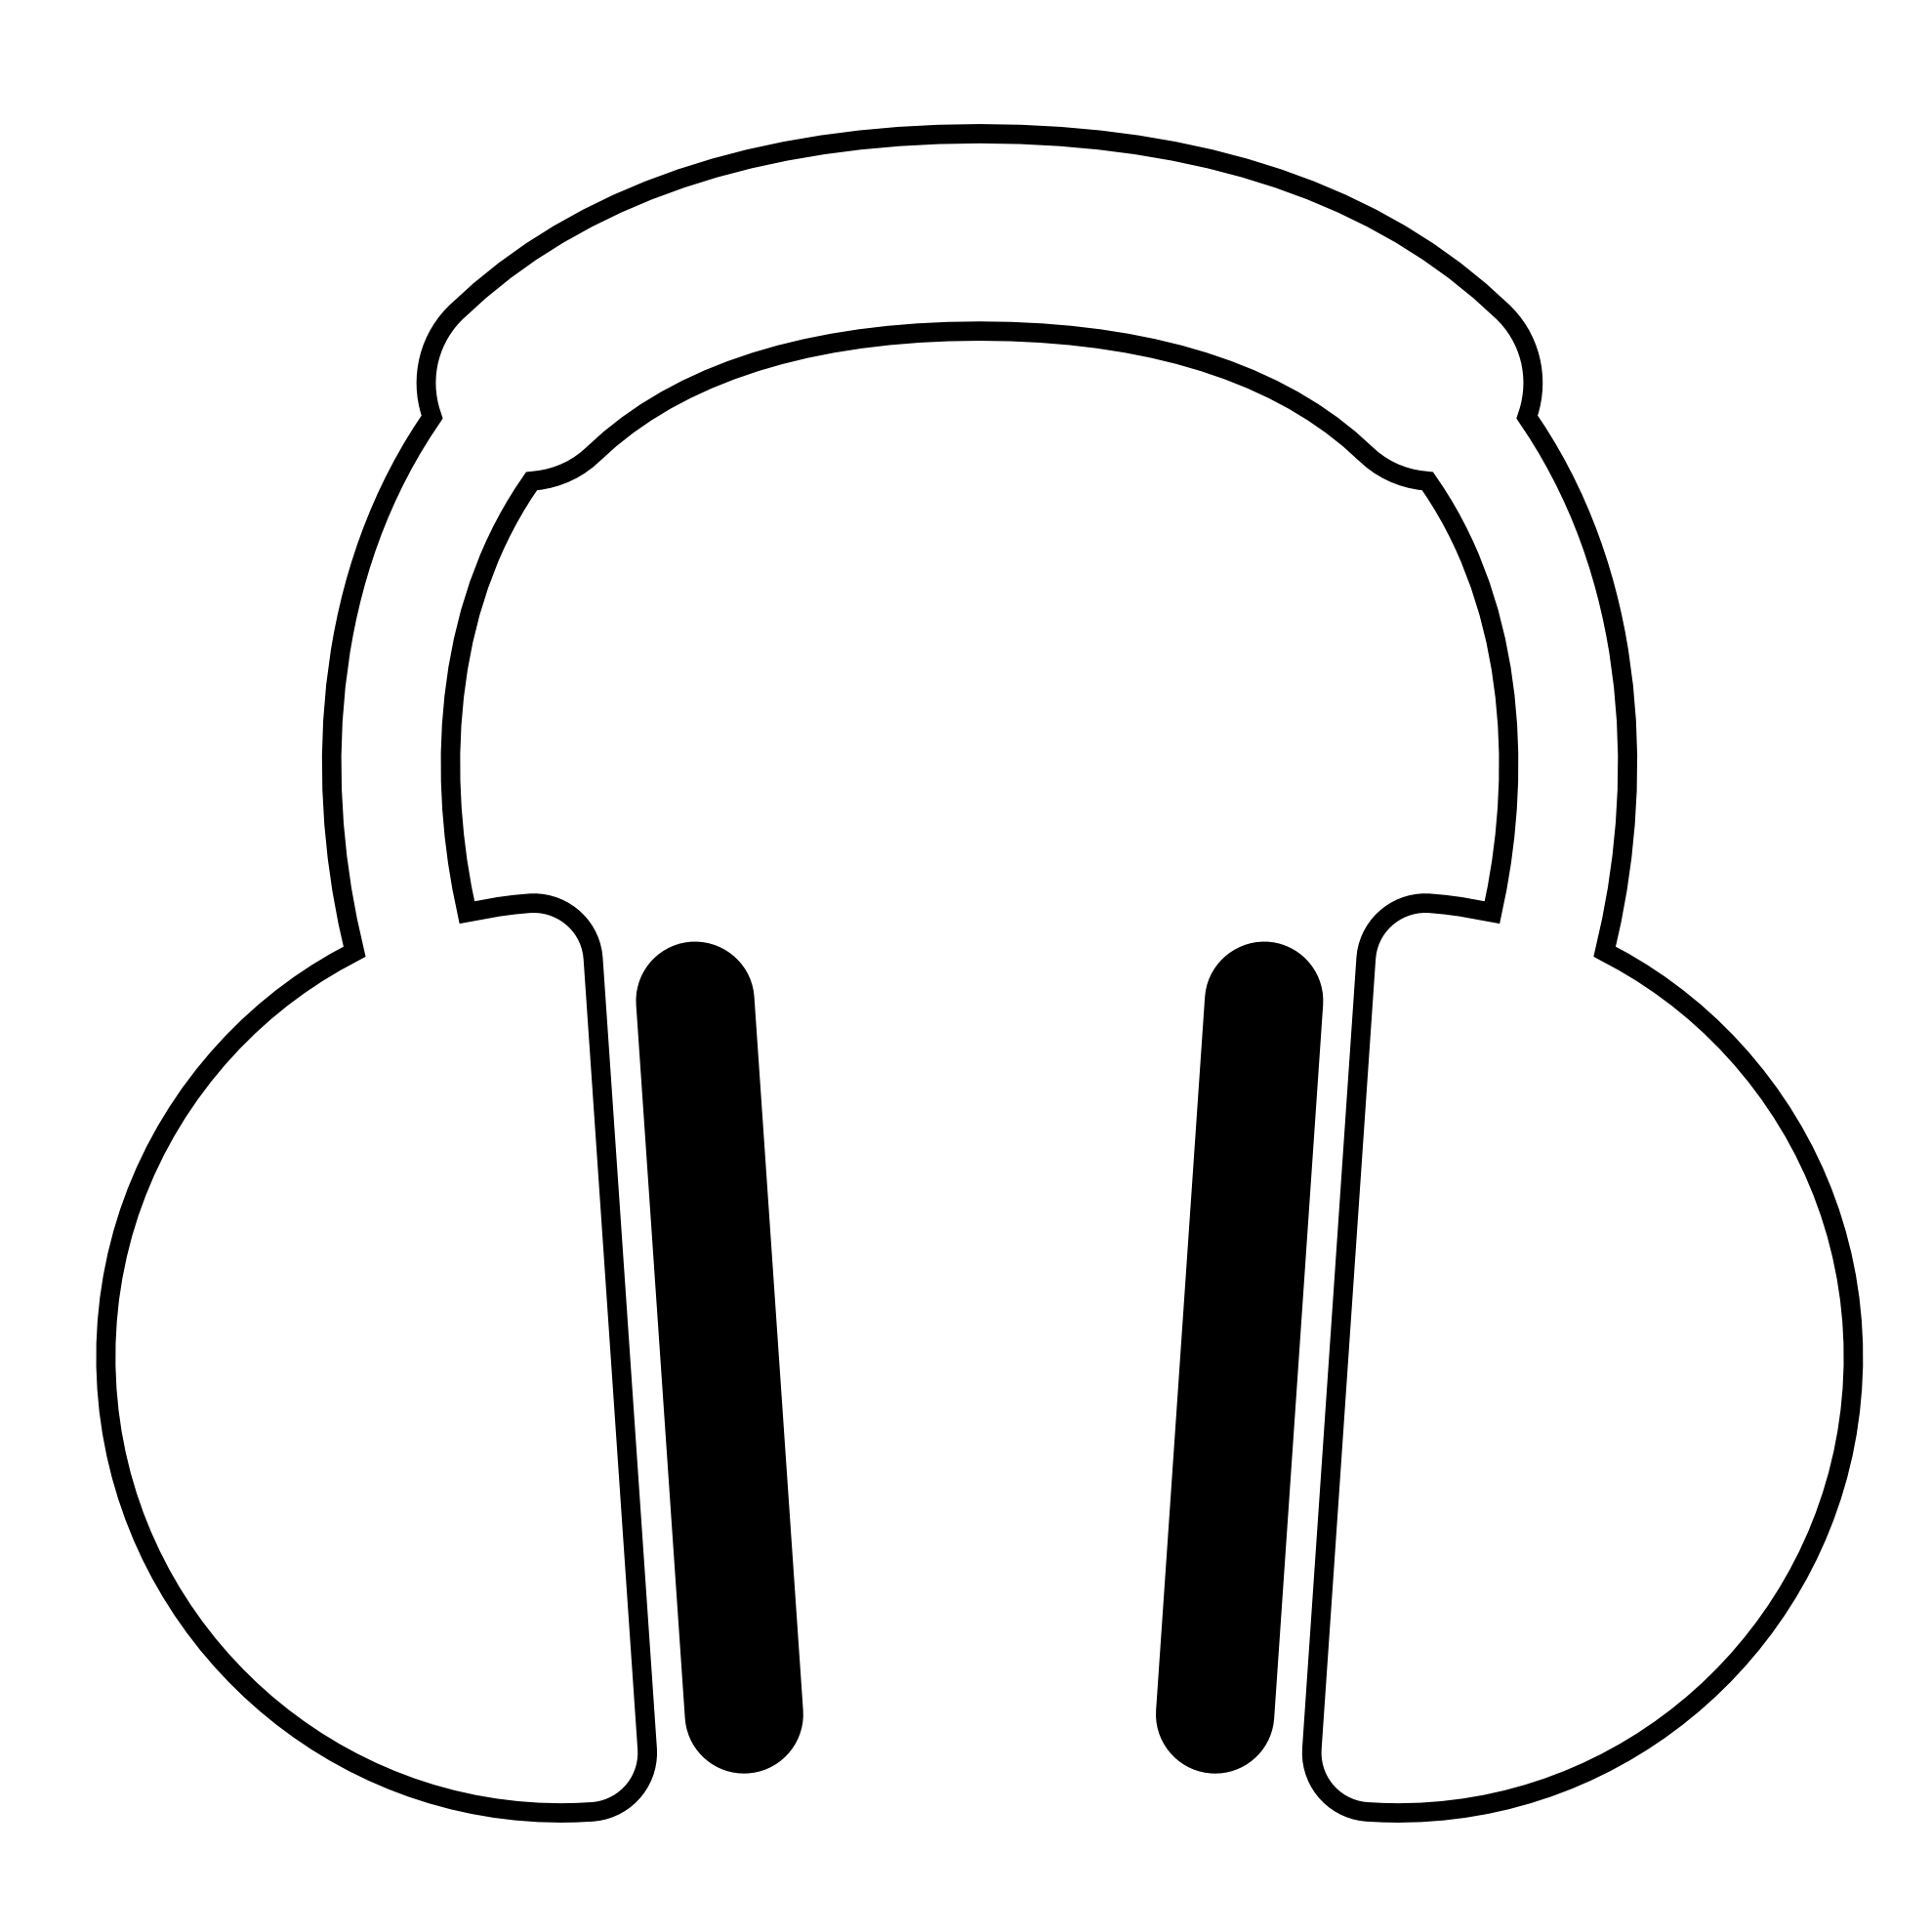 Listening To Music Clipart Black And White - Free ...